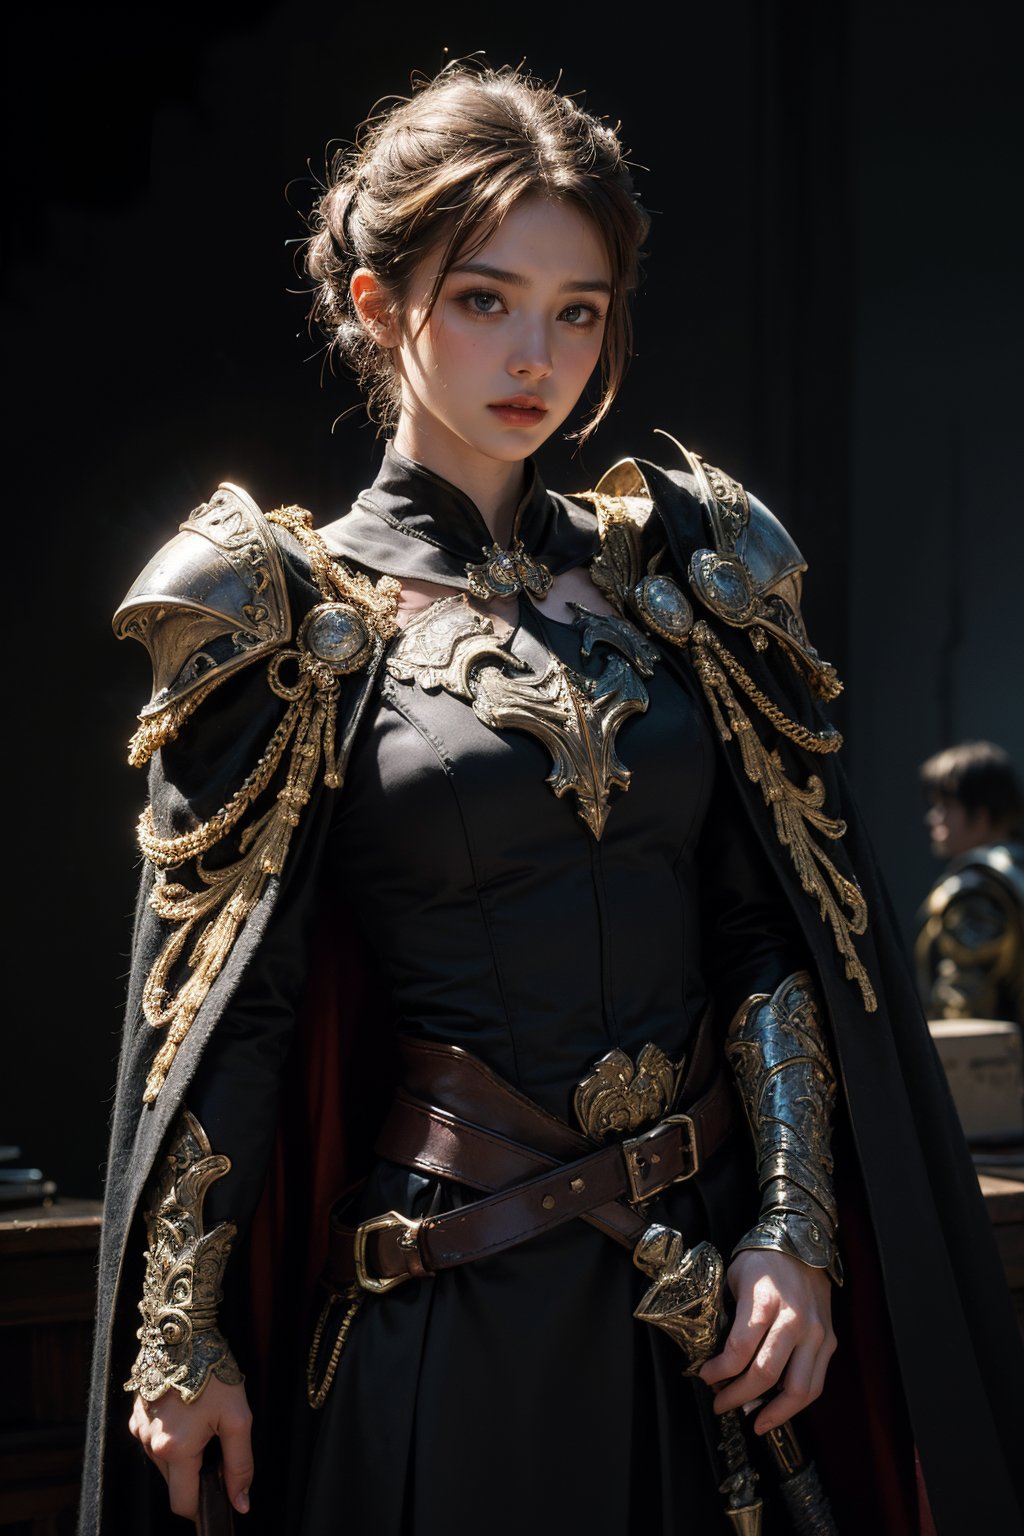 serious look pressed lips, (black updo:1.2), (black steel armor:1.1) and robes (cape:1.2) royalty ornate (embroidery:0.5) with sword, skinny (Gorget Plackart pauldron :1.3), (masterpiece:1.2) (illustration:1.1) (best quality:1.2) (detailed) (intricate) (8k) (HDR) (wallpaper) (cinematic lighting) (sharp focus)